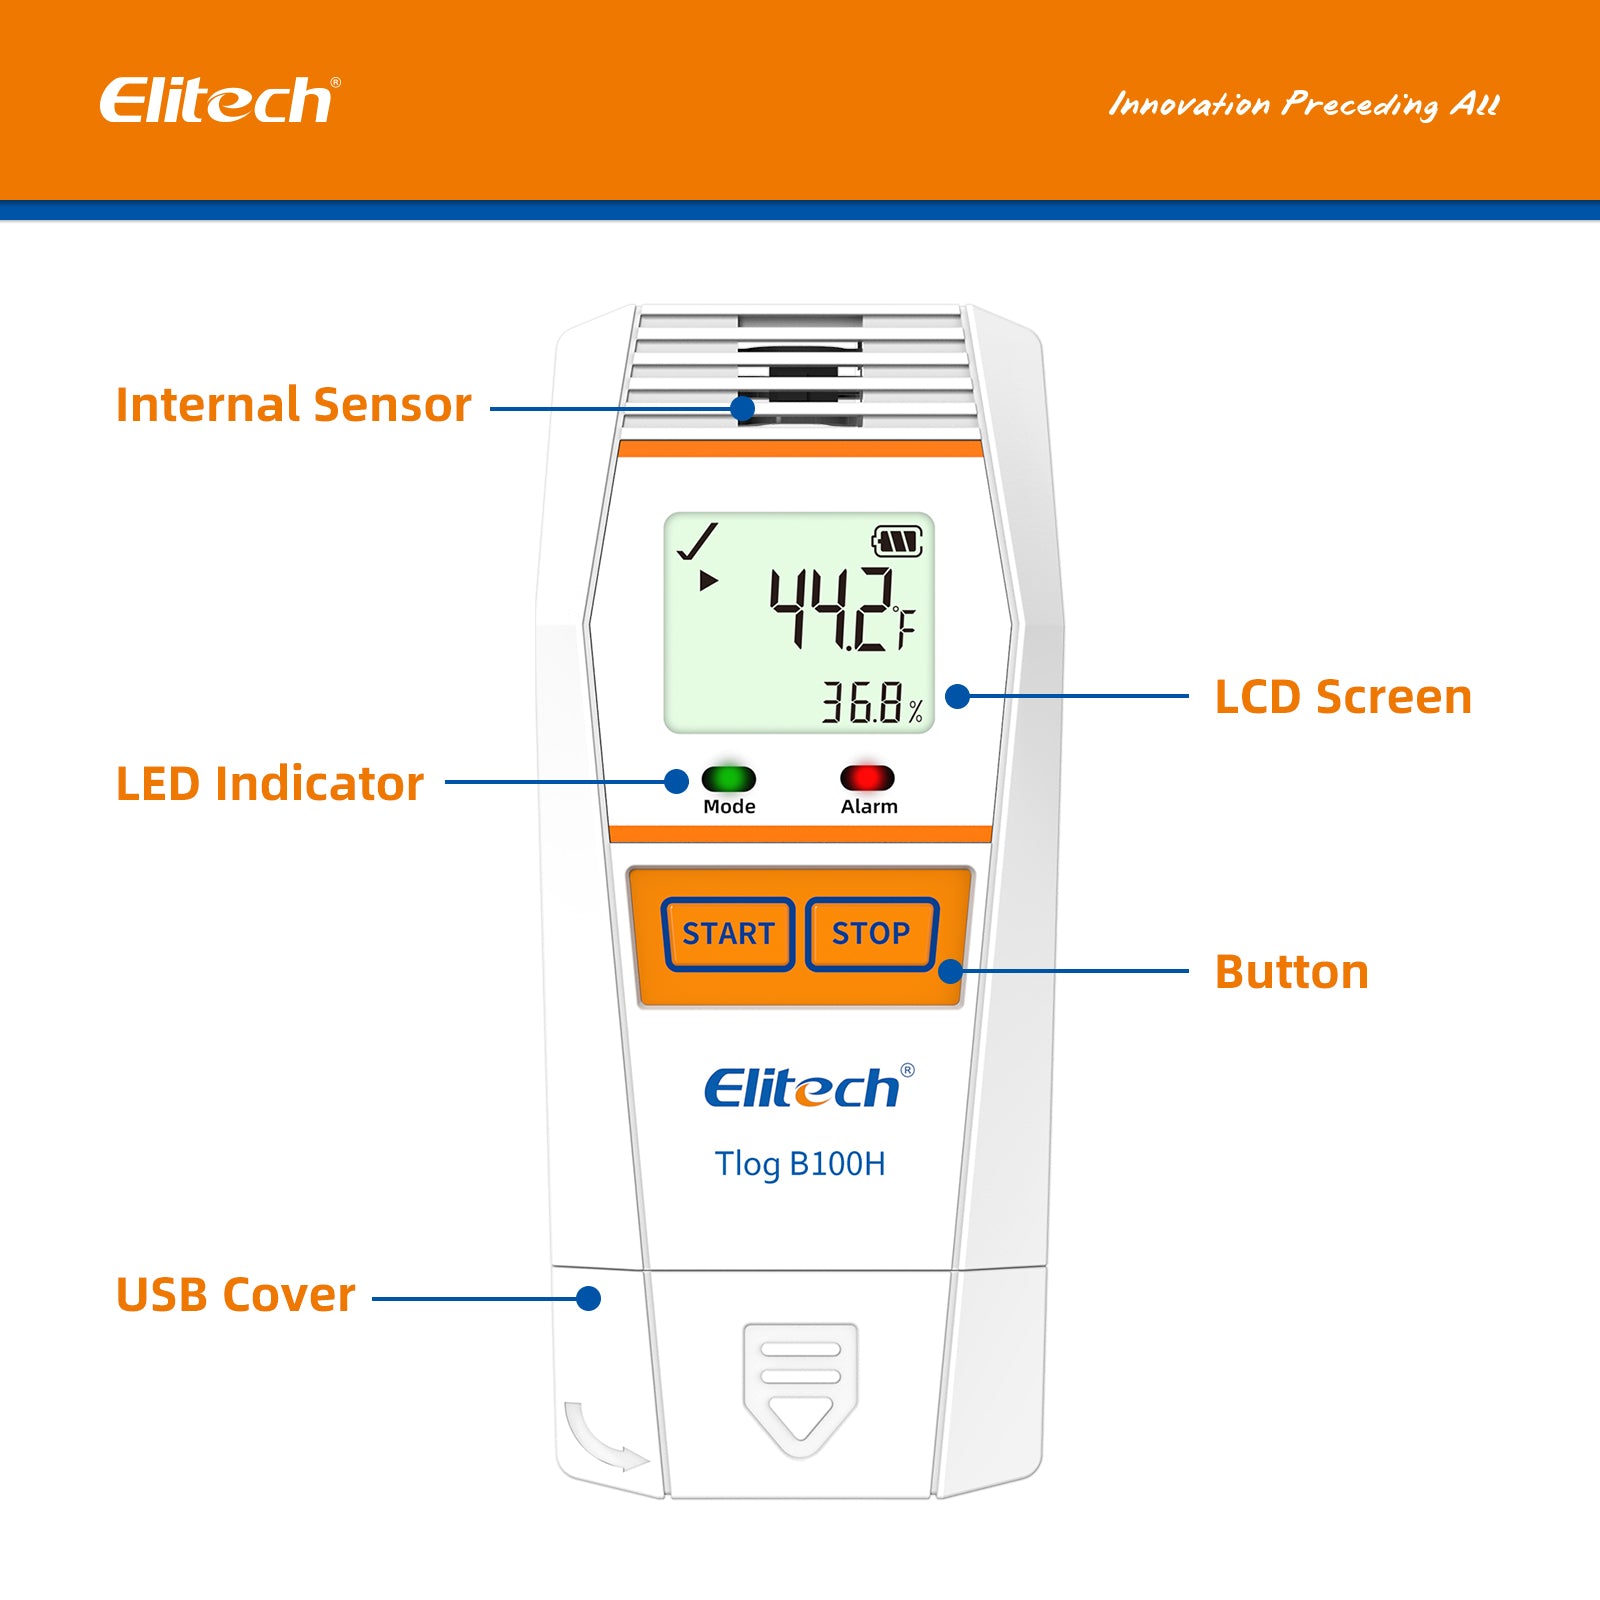 Elitech Tlog B100H Wireless Temperature and Humidity USB Transport Data Logger with LCD Display